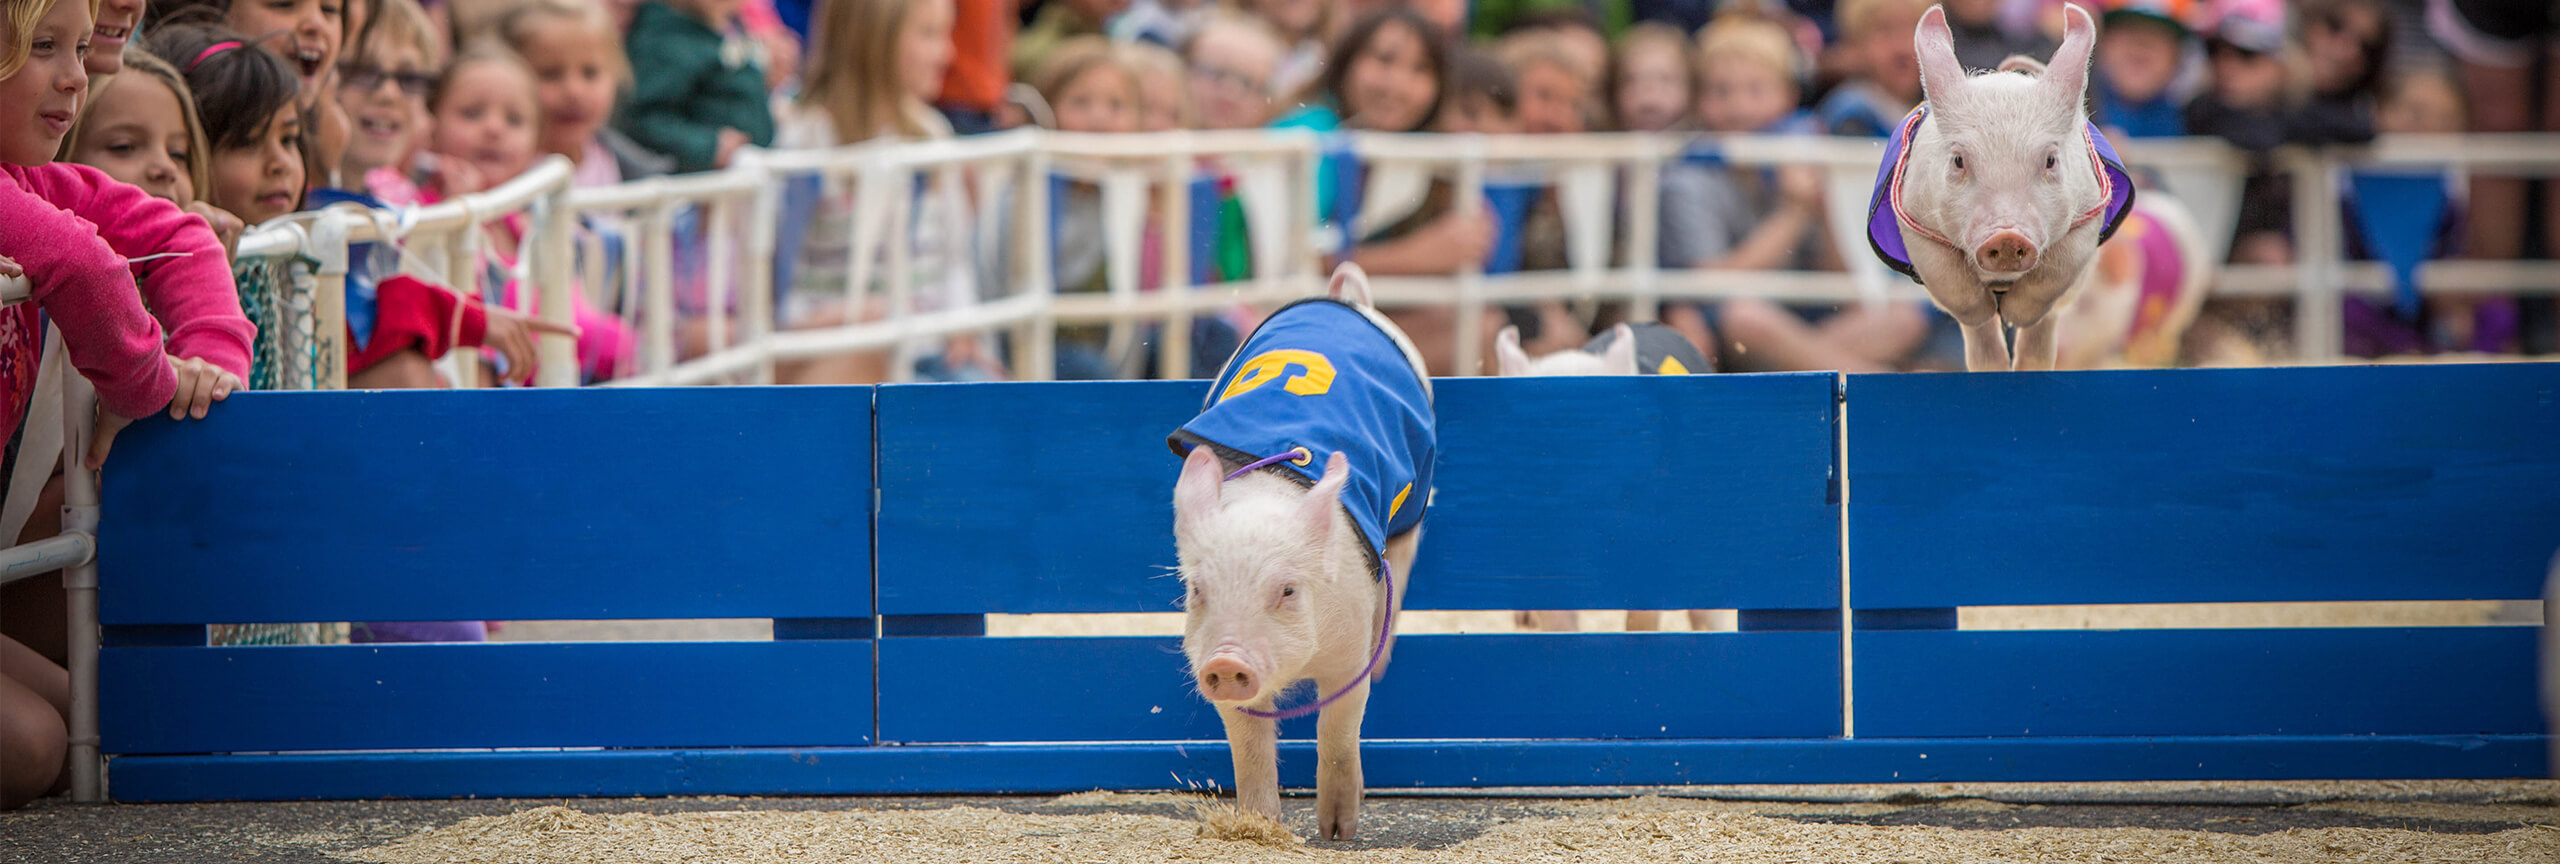 Two piglets wearing blankets jumping over blue fence during pig races.